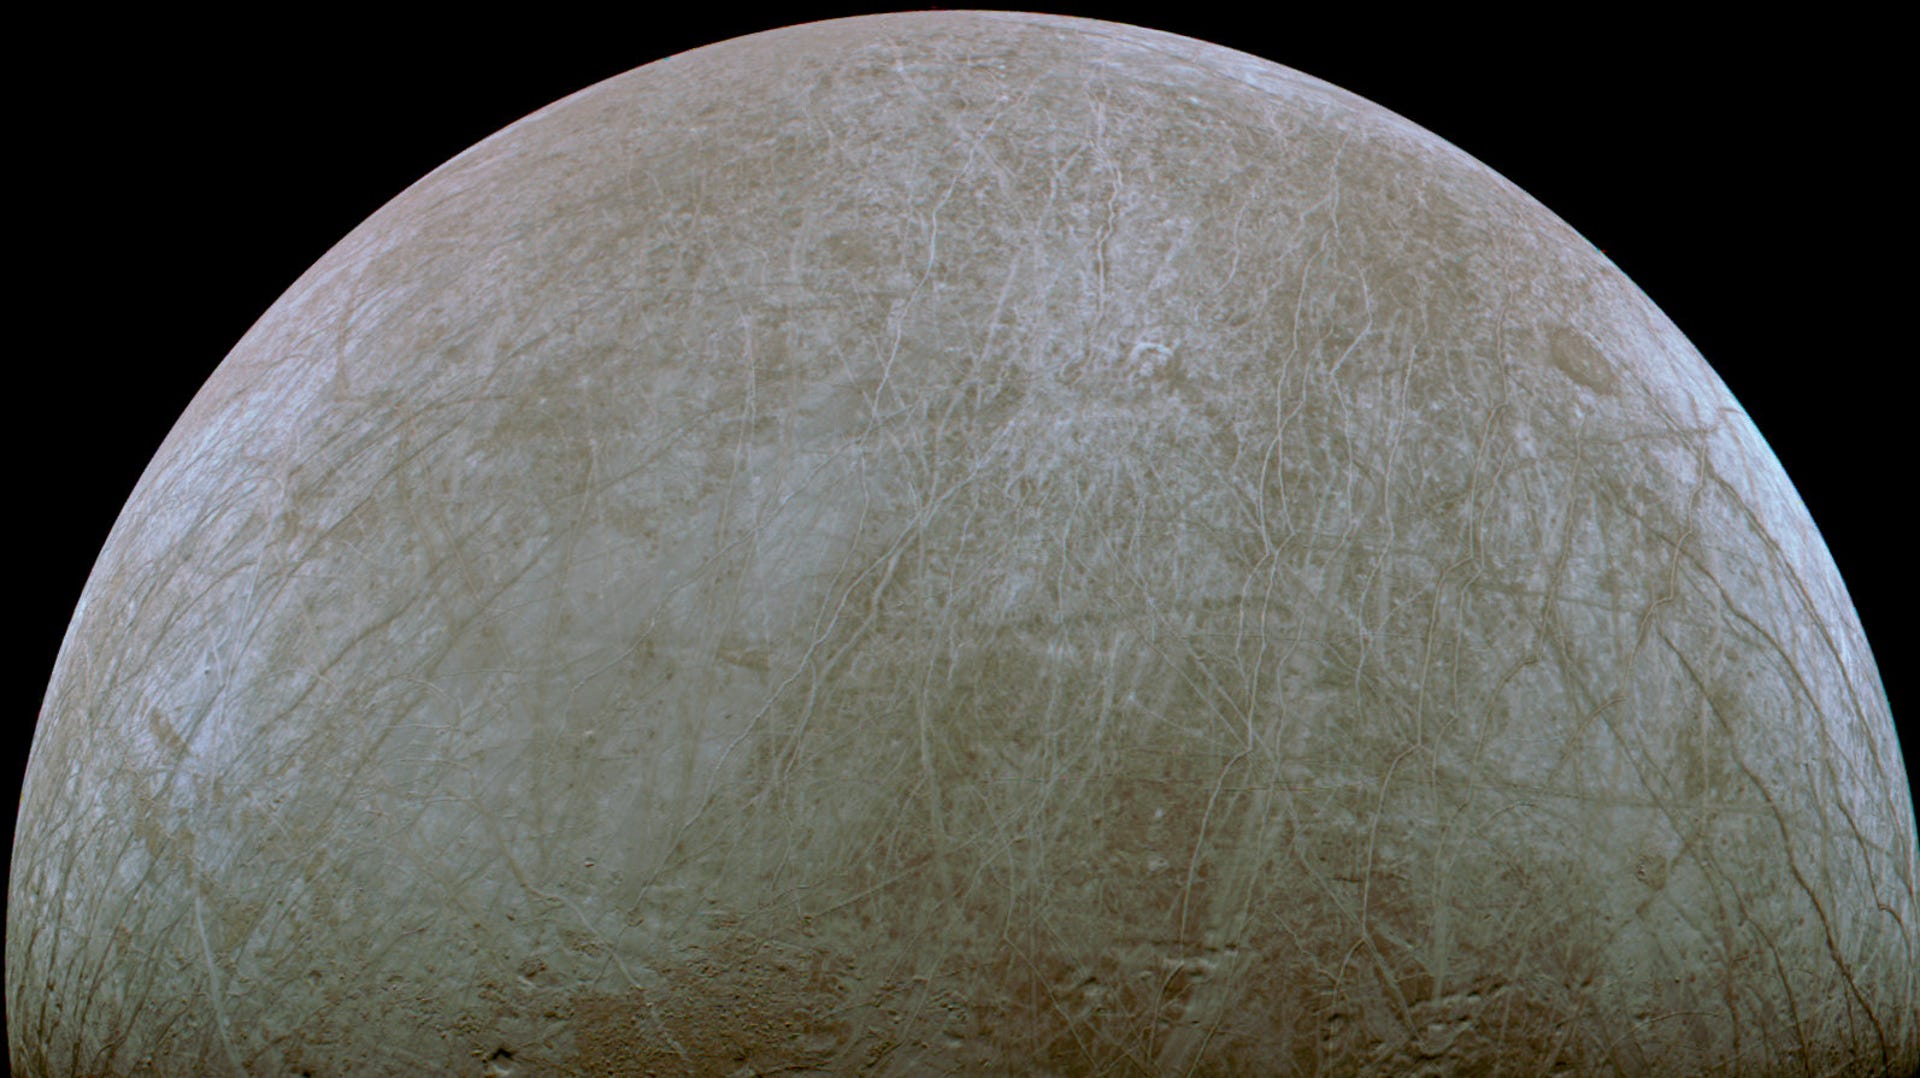 Jupiter's moon Europa shows off its icy striations and craters in a half-moon view against black.